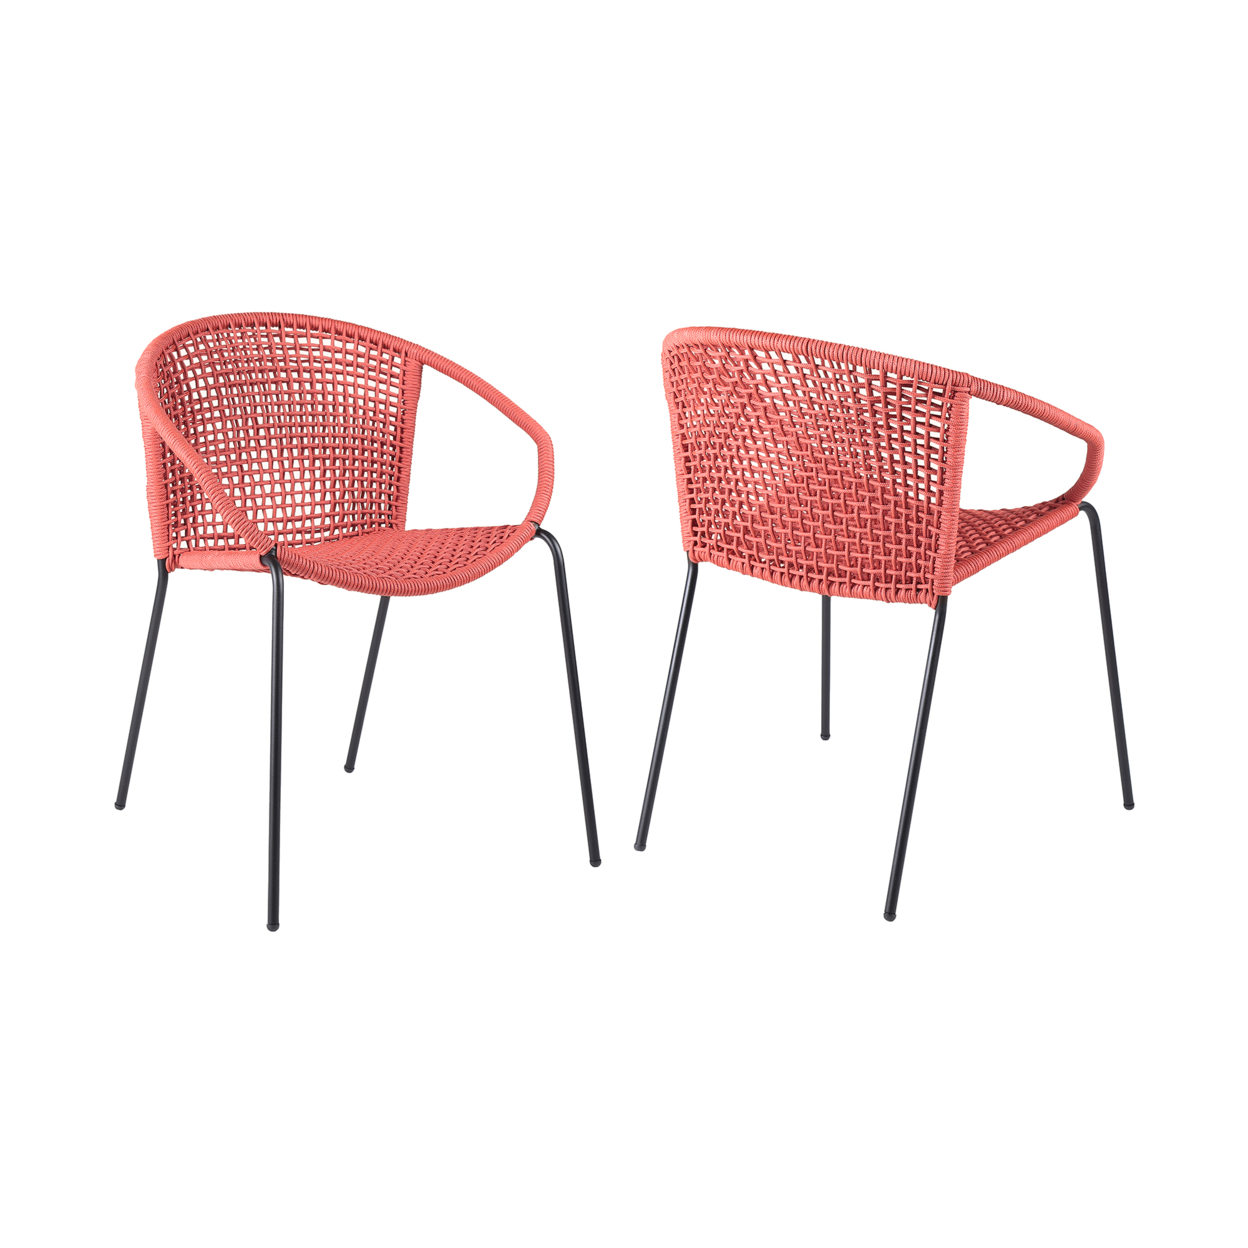 Dining Chair With Interwoven Geometric Seat And Back, Set Of 2, Pink- Saltoro Sherpi